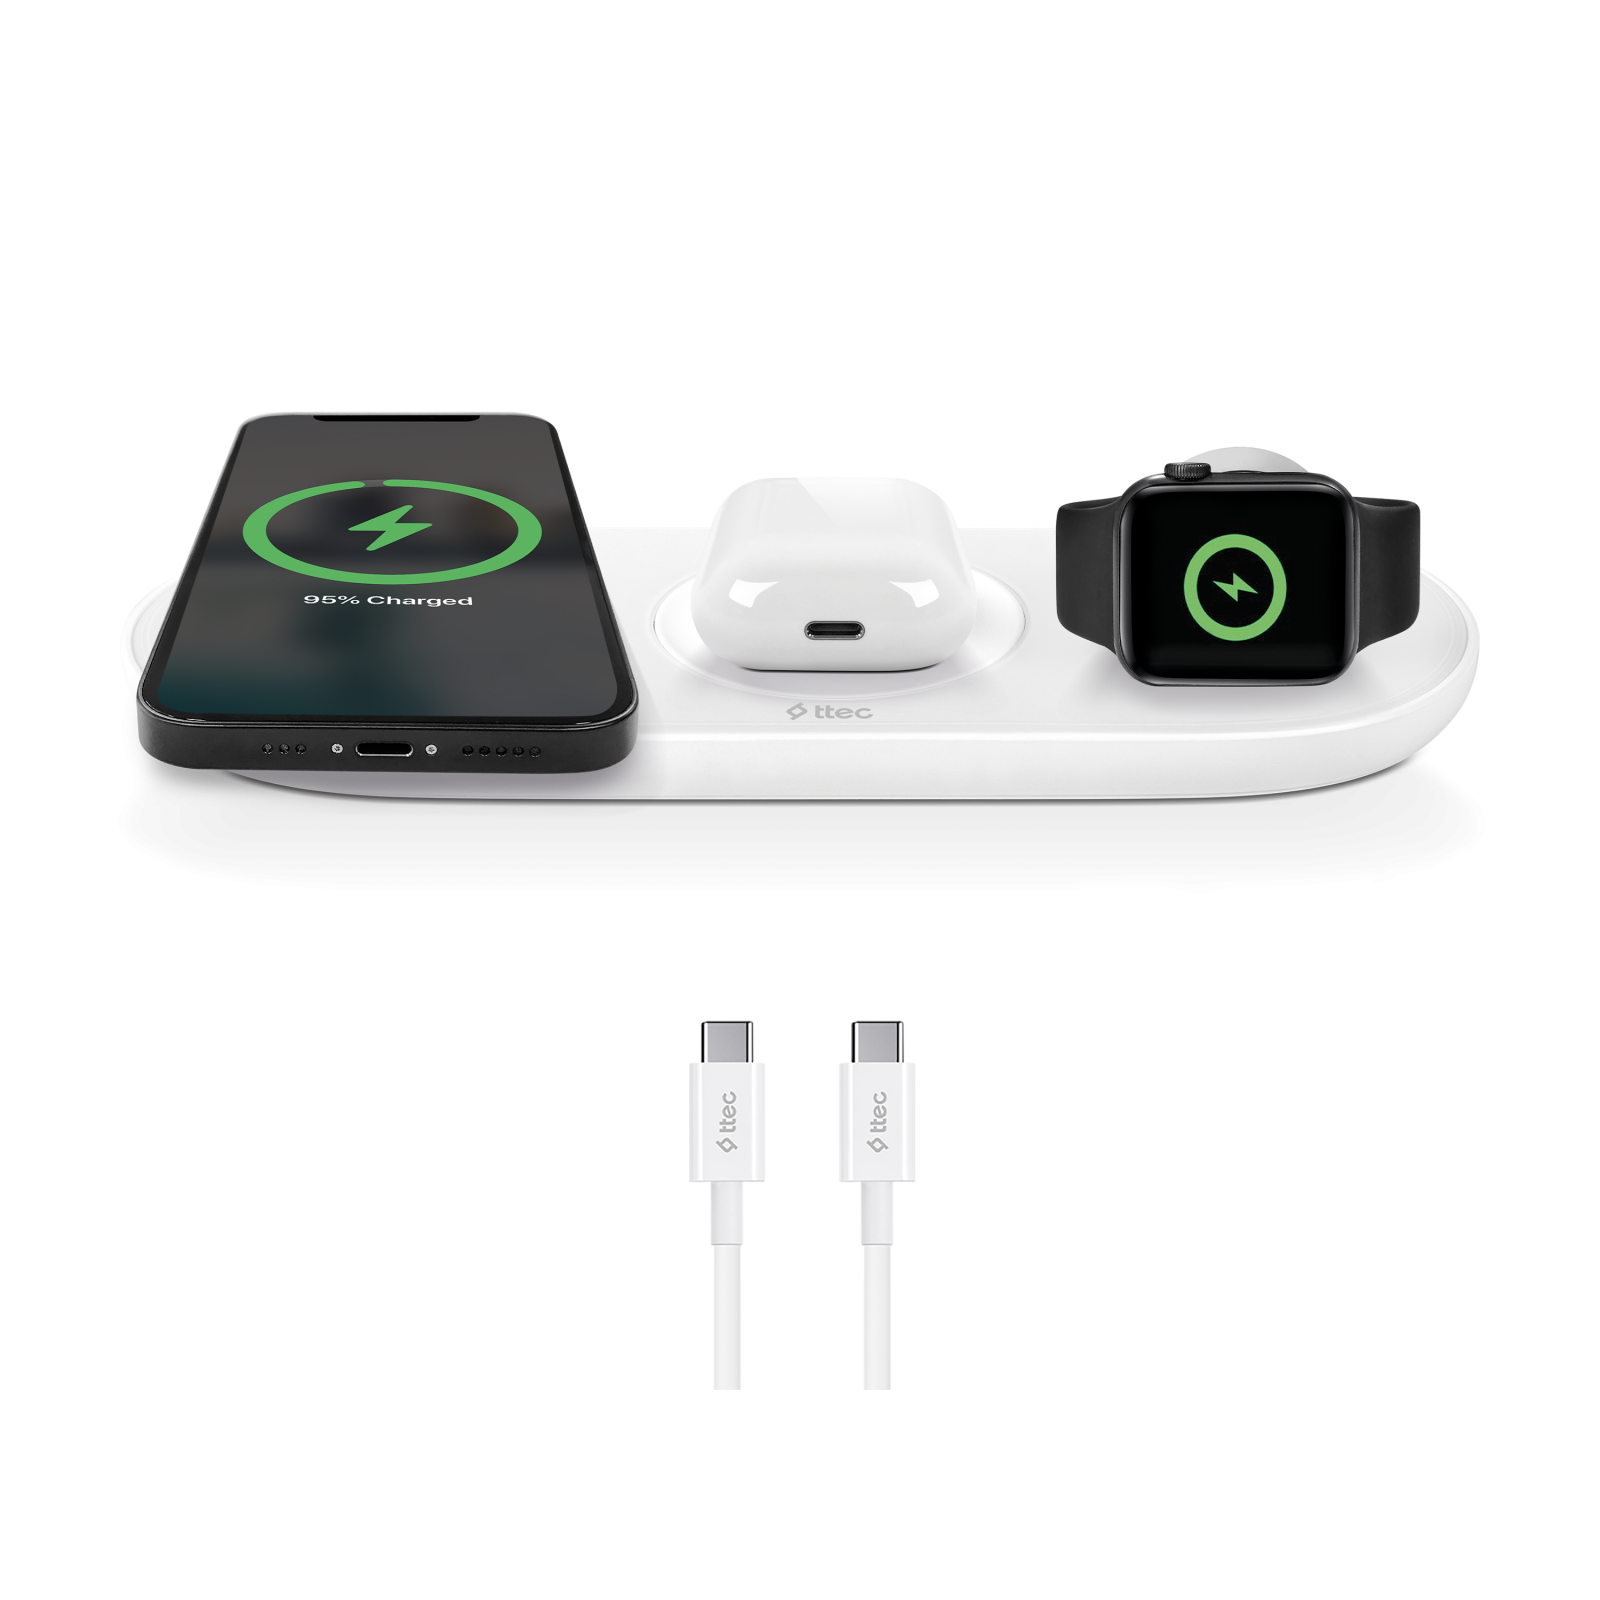 Безжично зарядно ttec AirCharger Trio (3 in 1) iPhone + Apple Watch + AirPods Wireless Speed Charging Station